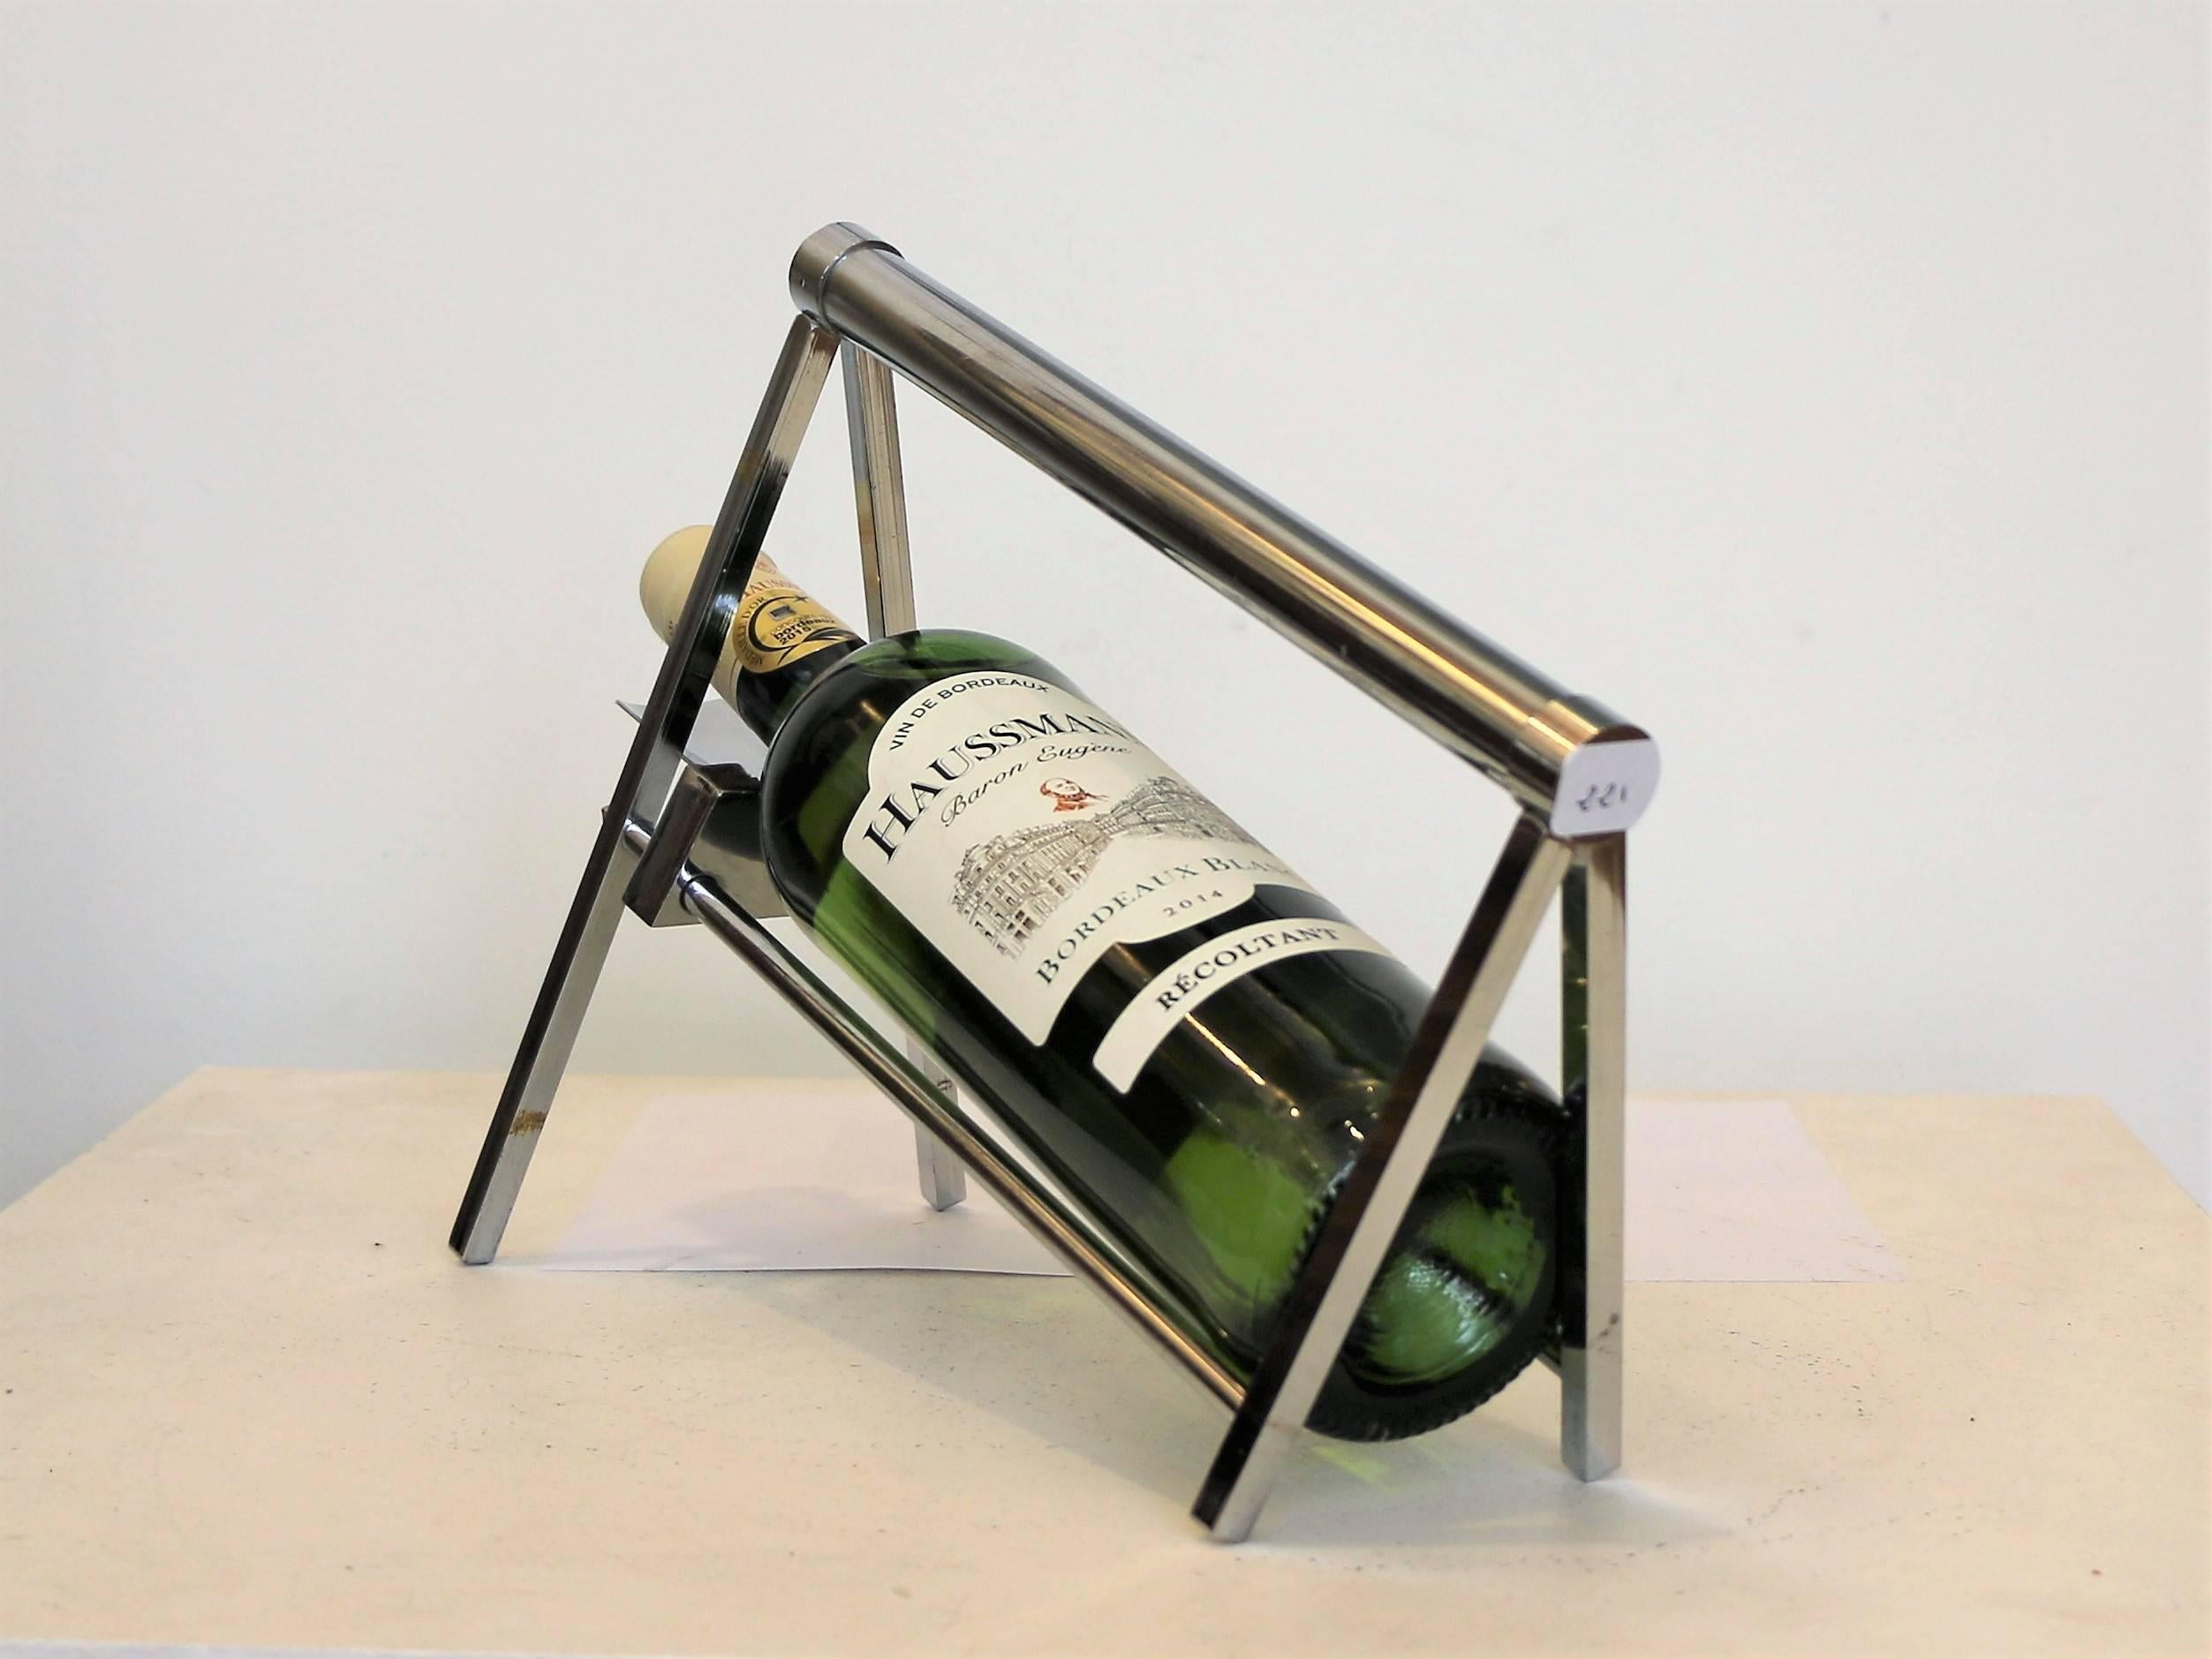 Iconic bottle carrier by Jacques Adnet (1900-1984). Chromium plated metal. Typiccal modernist style from 1930-1940.